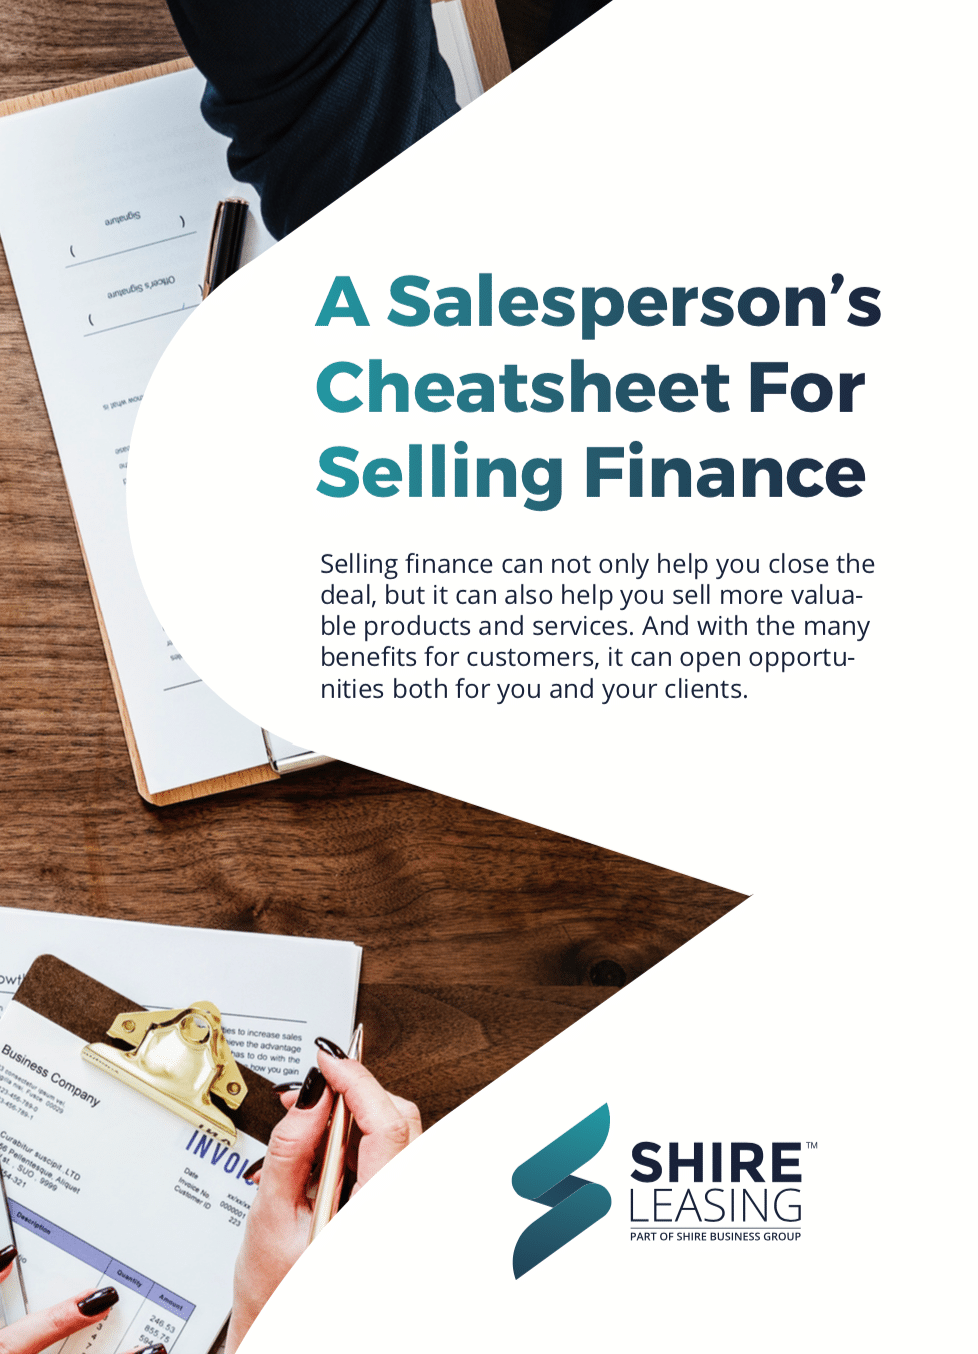 Cheat sheet for selling finance